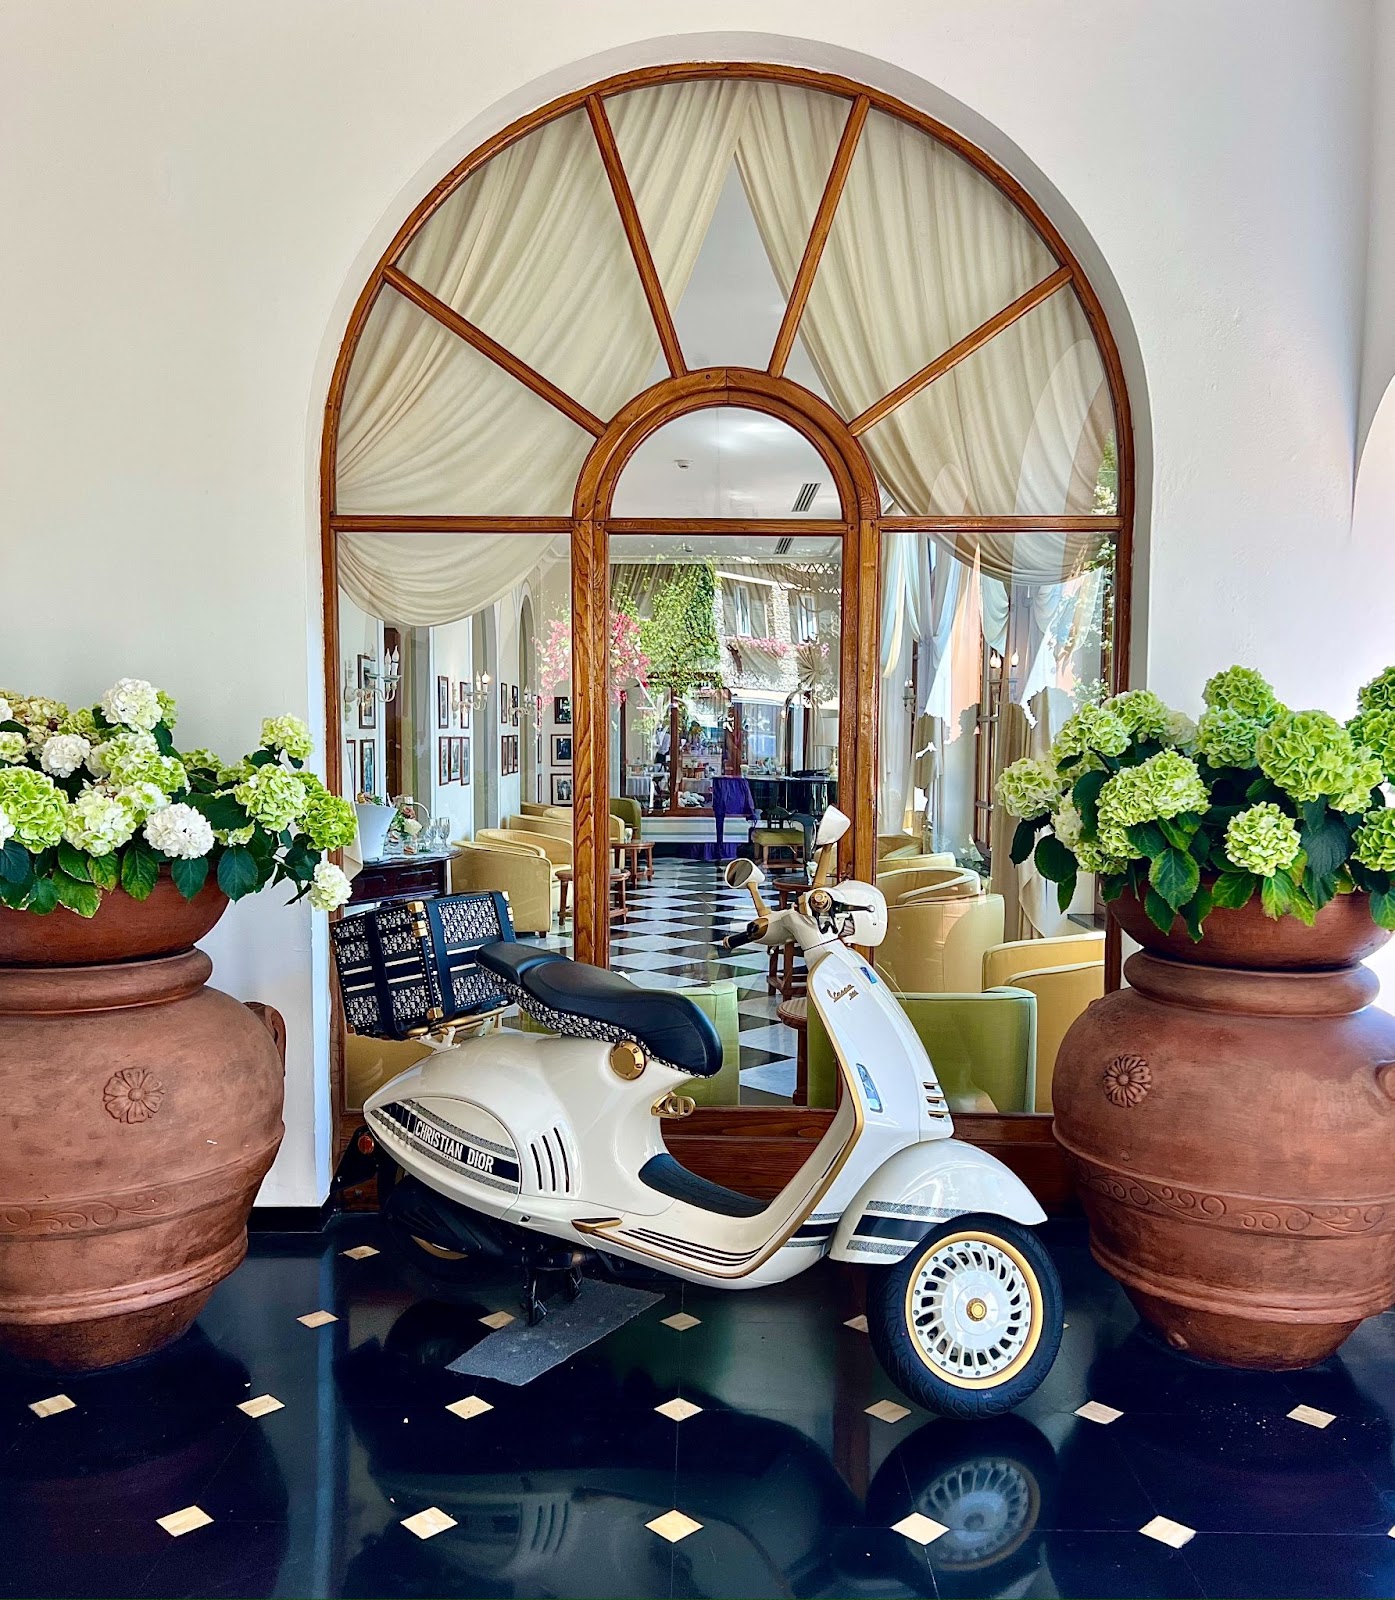 a scooter in a room with large vases and plants